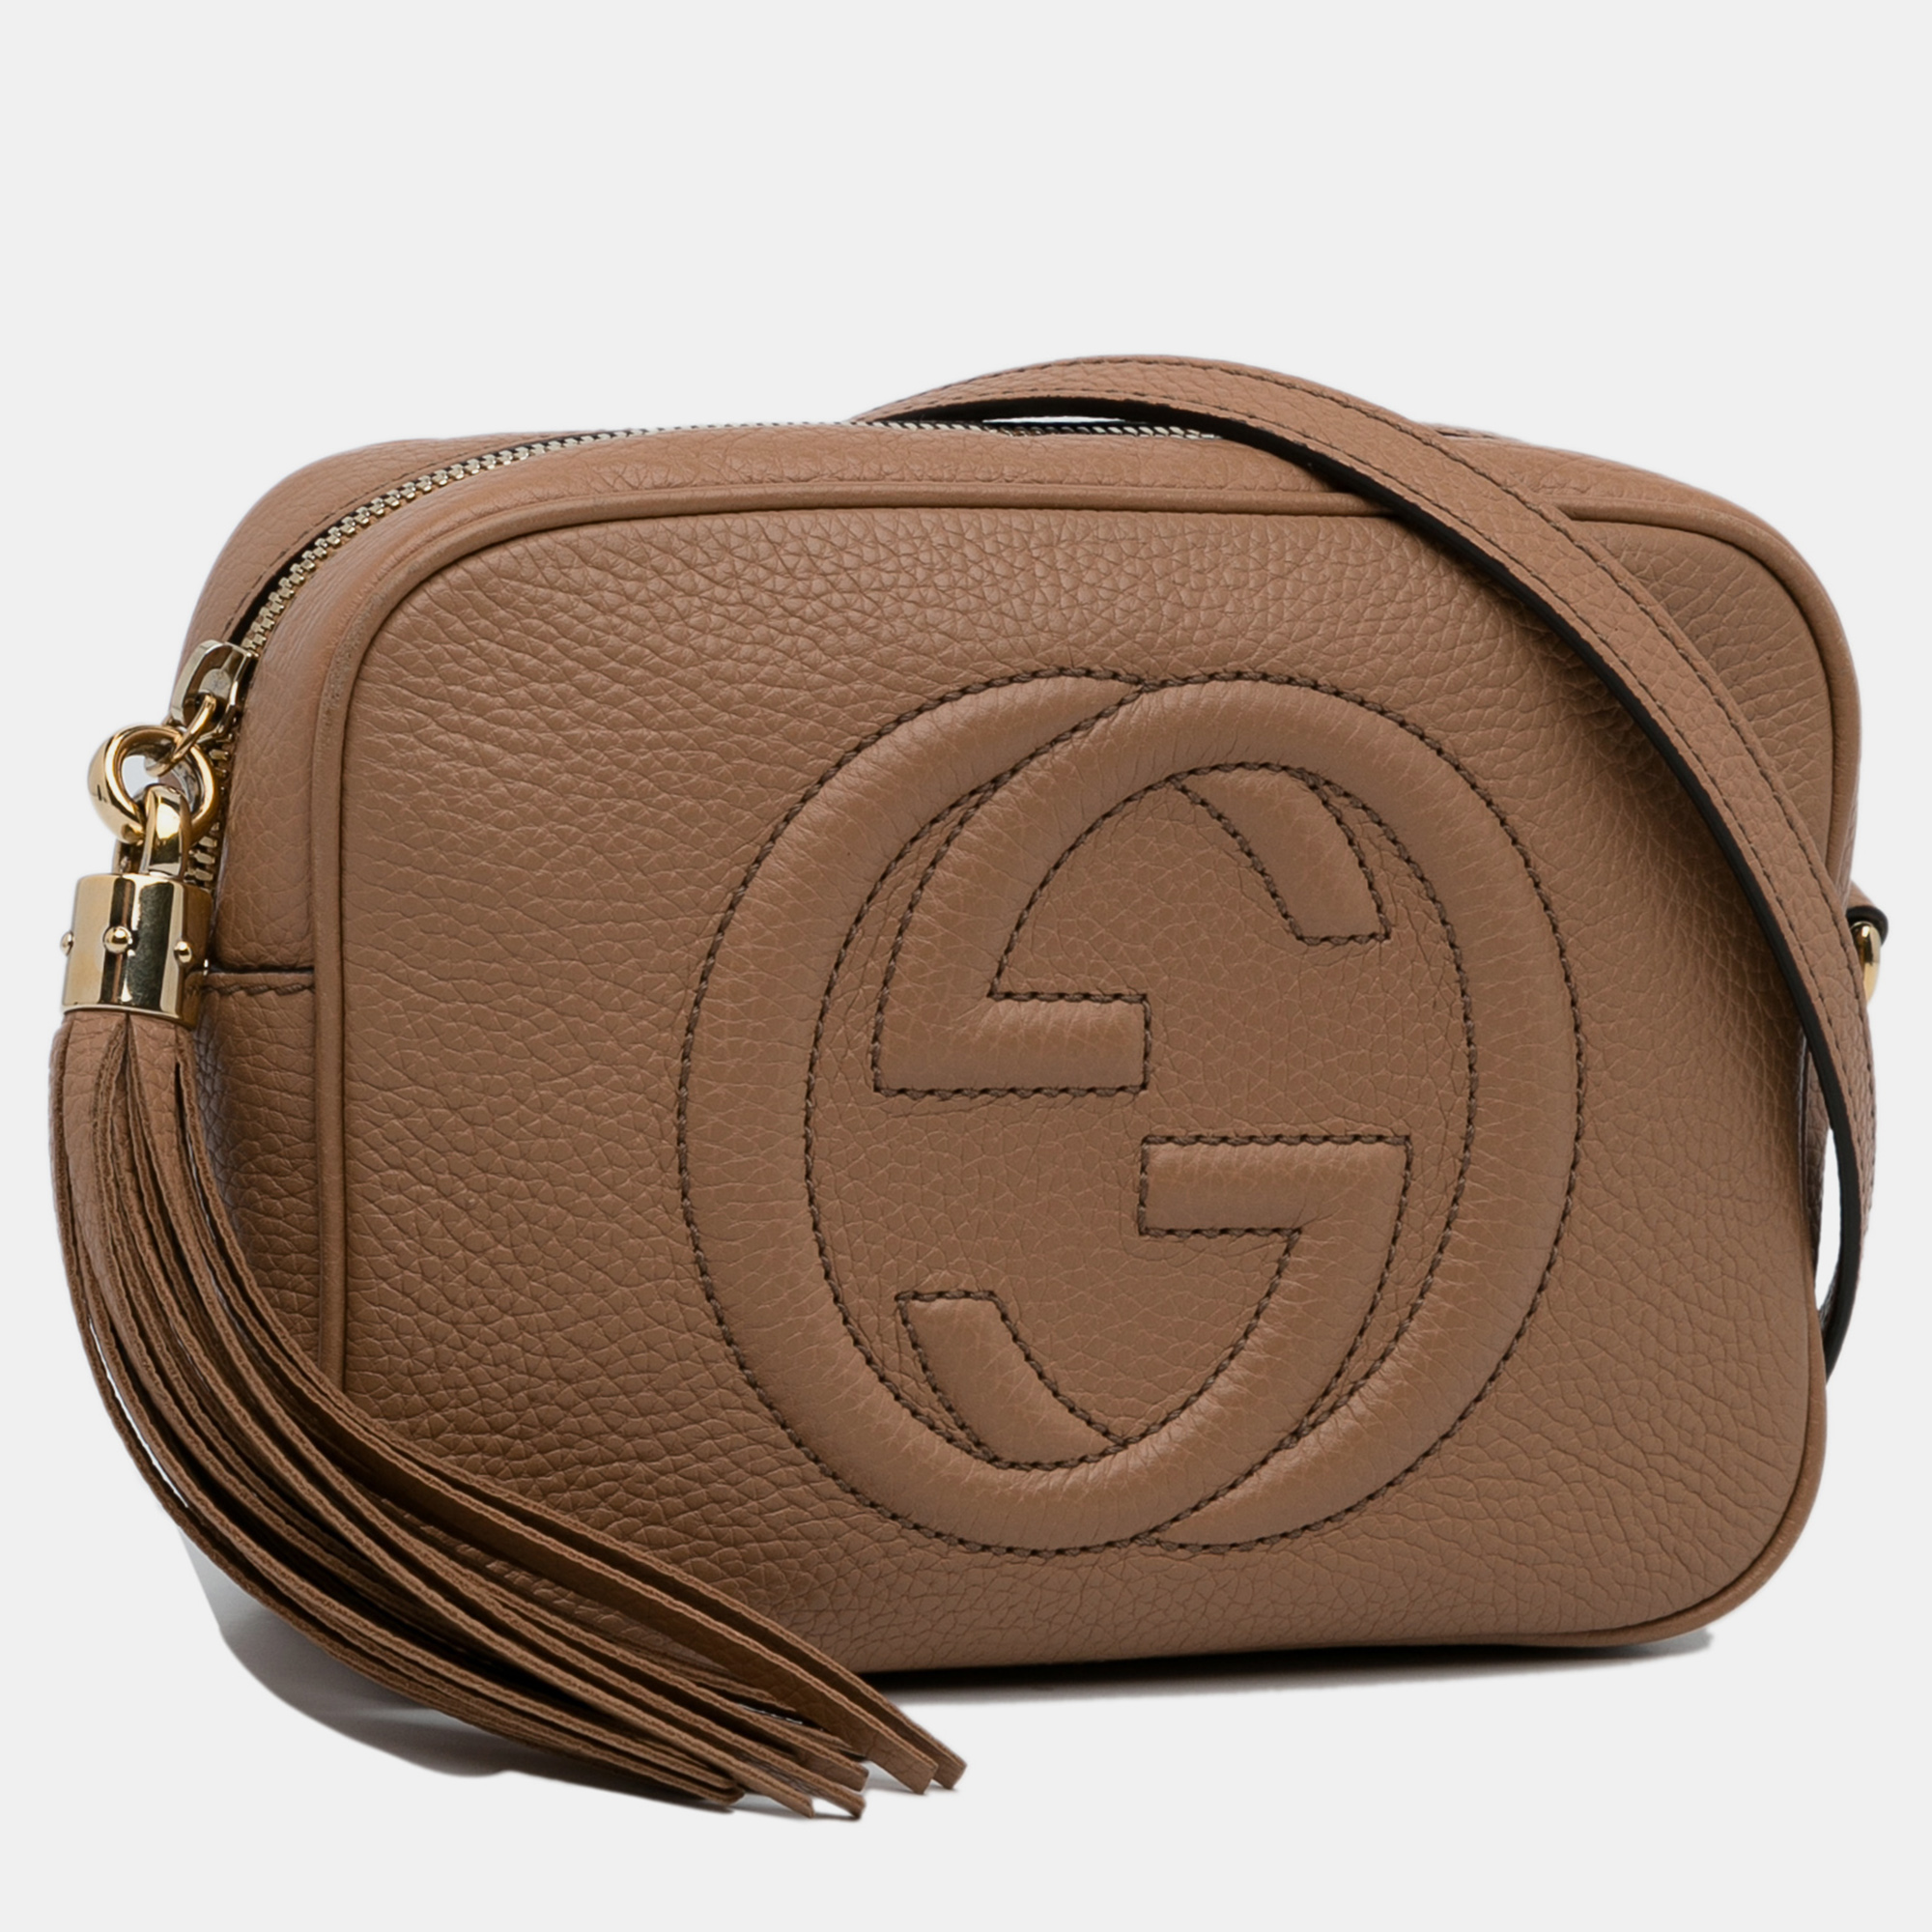 Gucci Brown Leather Soho Disco